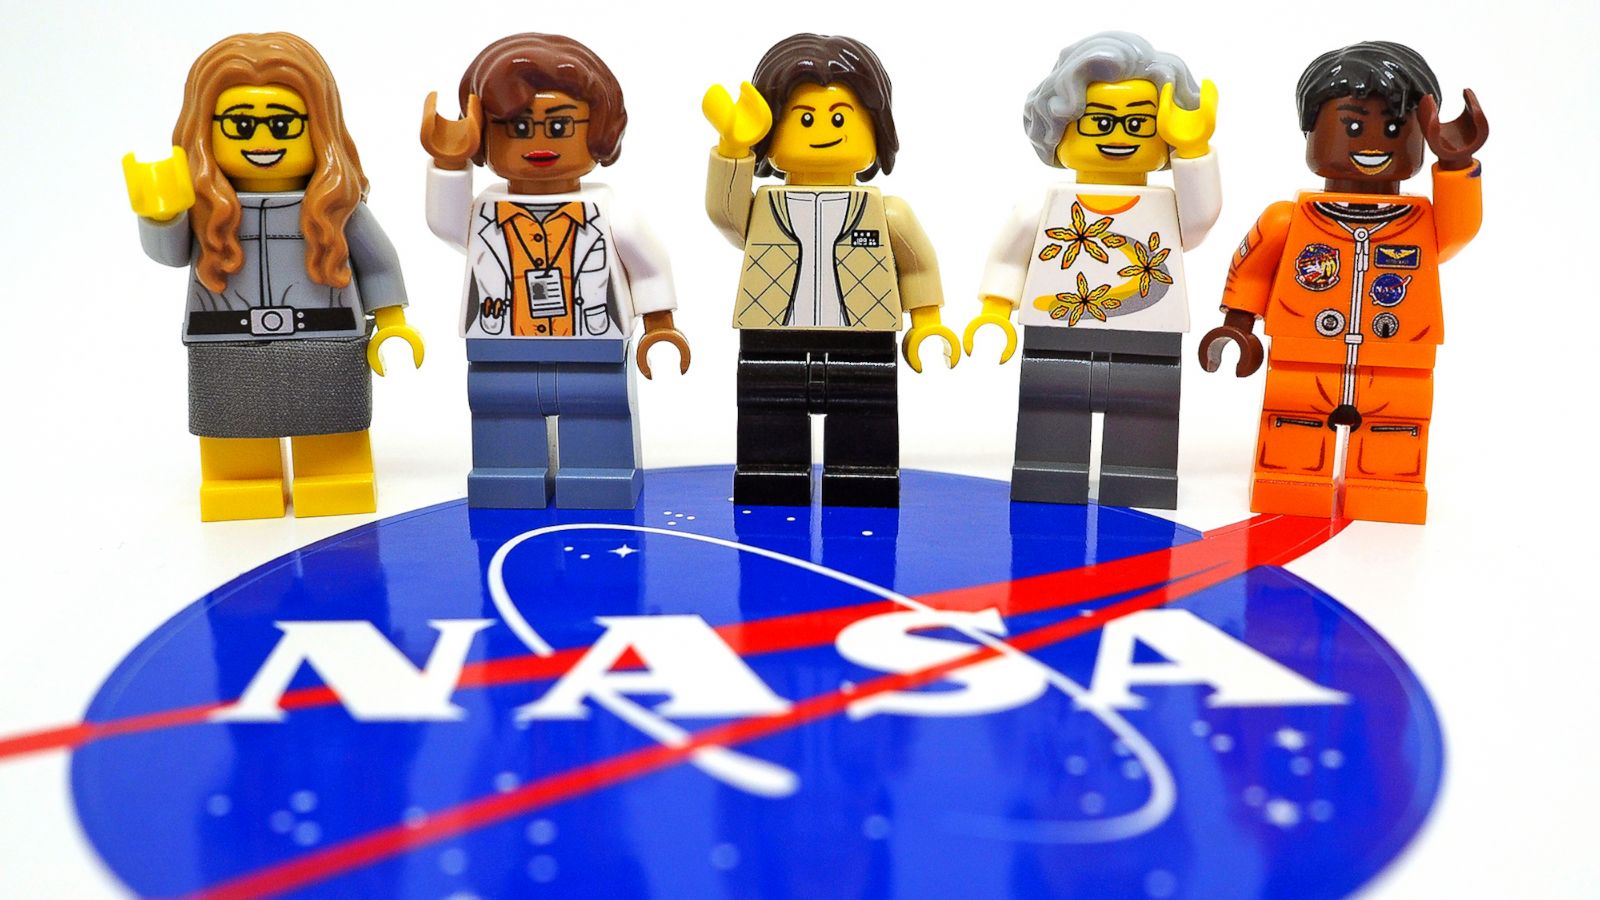 Introducing the Legal Justice Team, a new proposed set on LEGO Ideas, by  Maia Weinstock